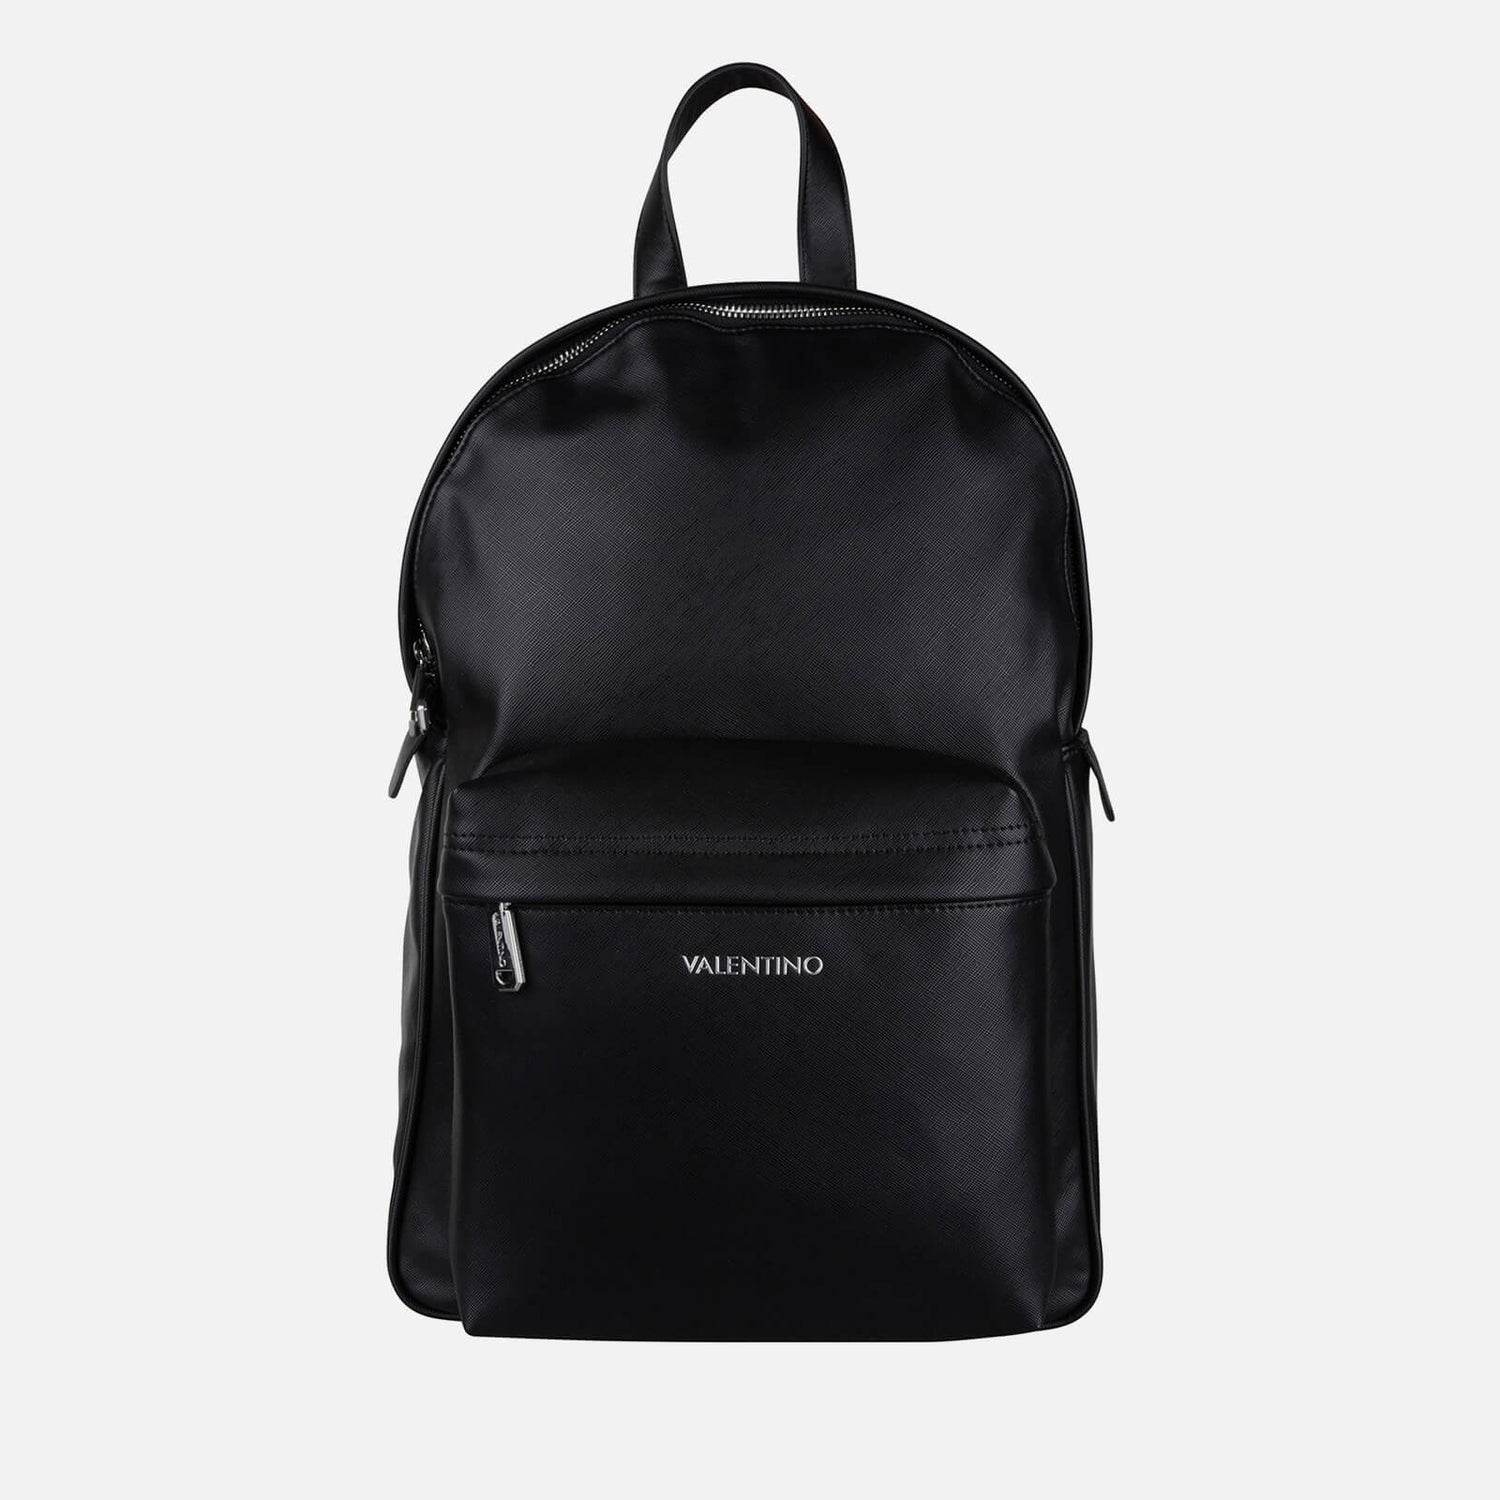 Valentino Marnier Faux Leather Backpack